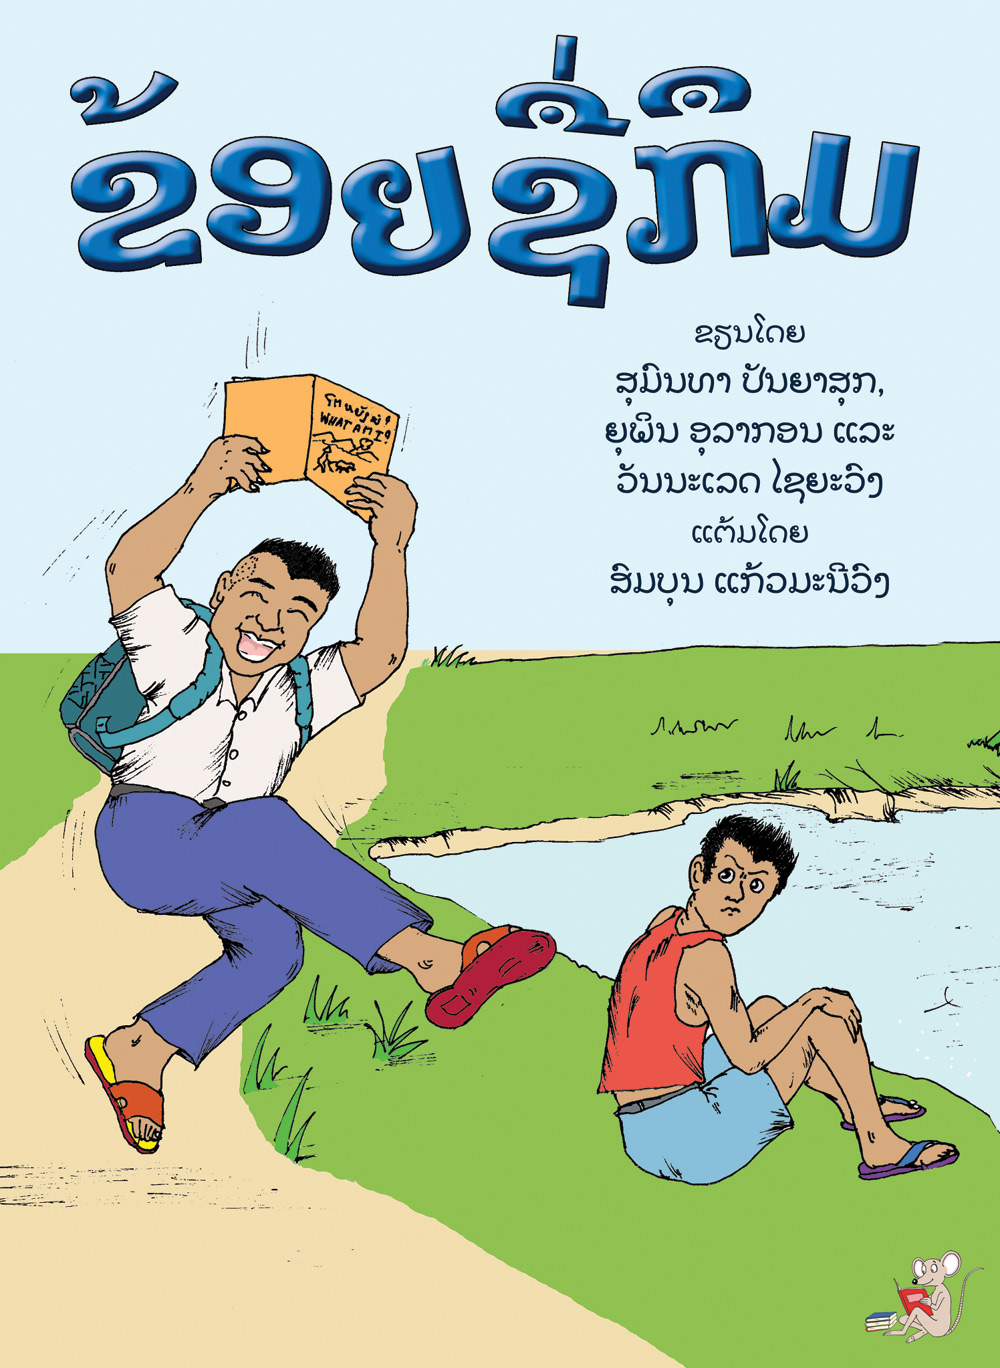 I Am Geum large book cover, published in Lao language